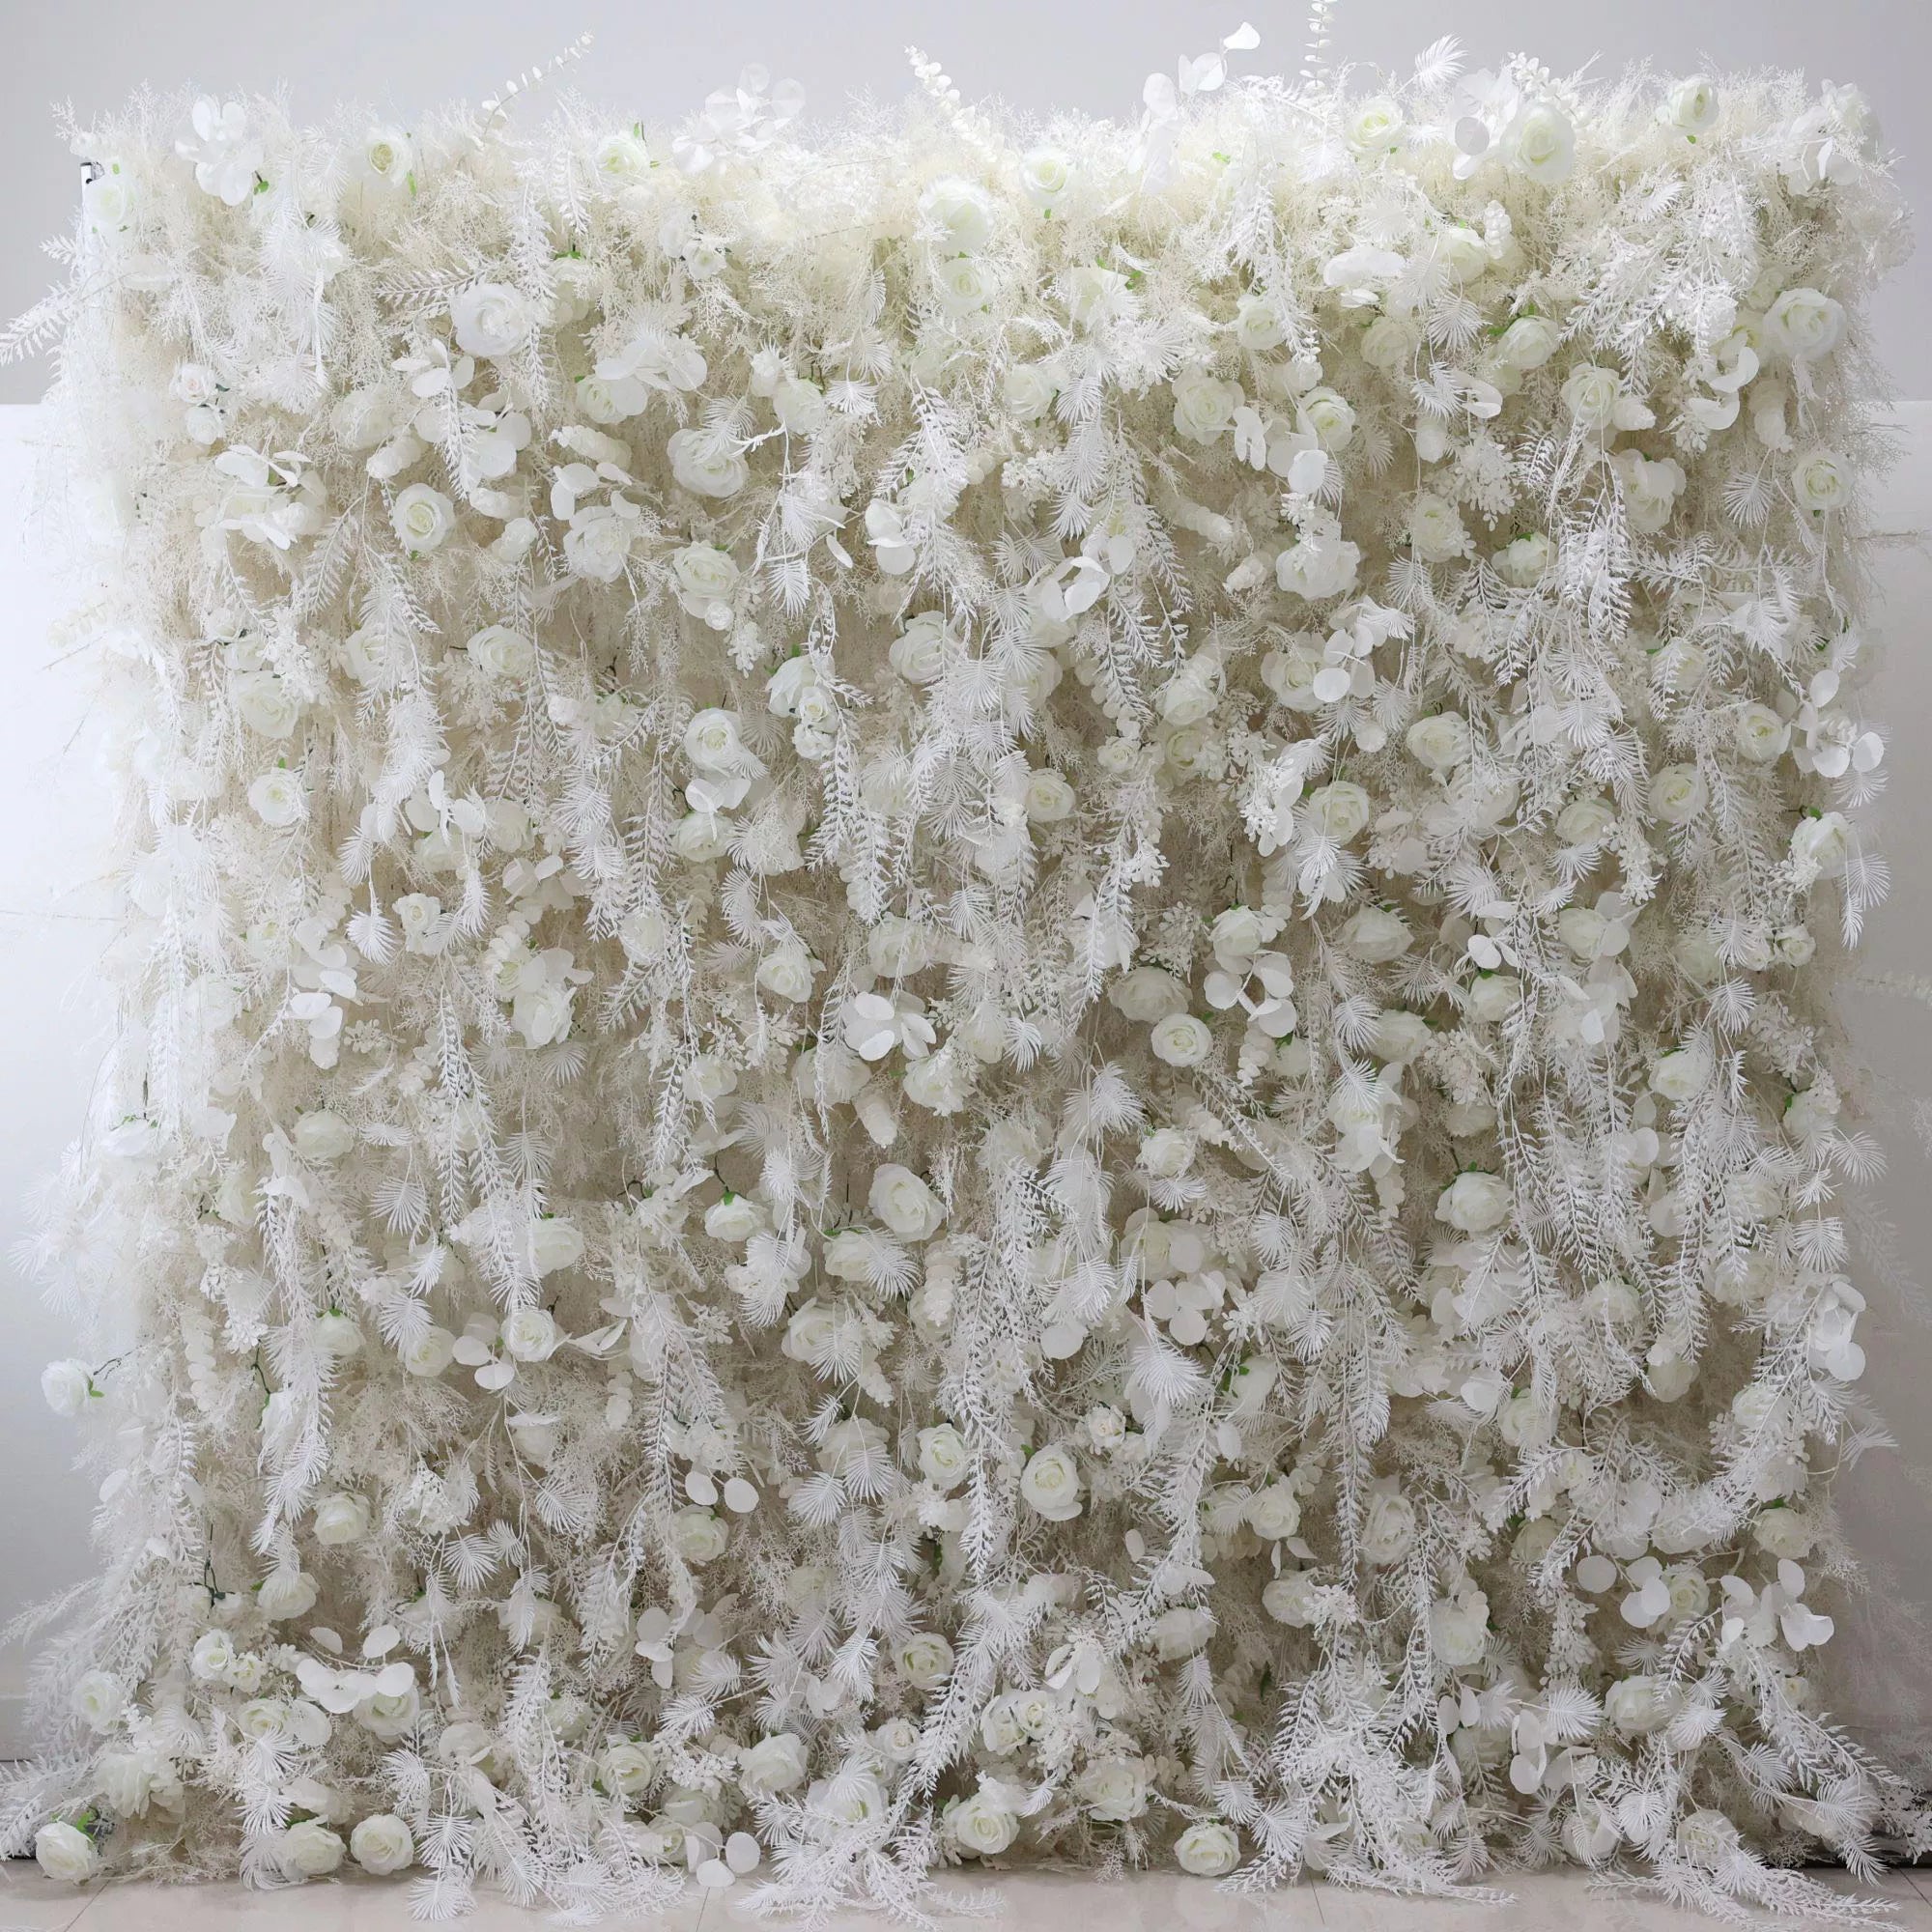 Ethereal White Floral Wall with Feathered Fern Accents: An Oasis of Serenity for Premium Events-VF-202-2